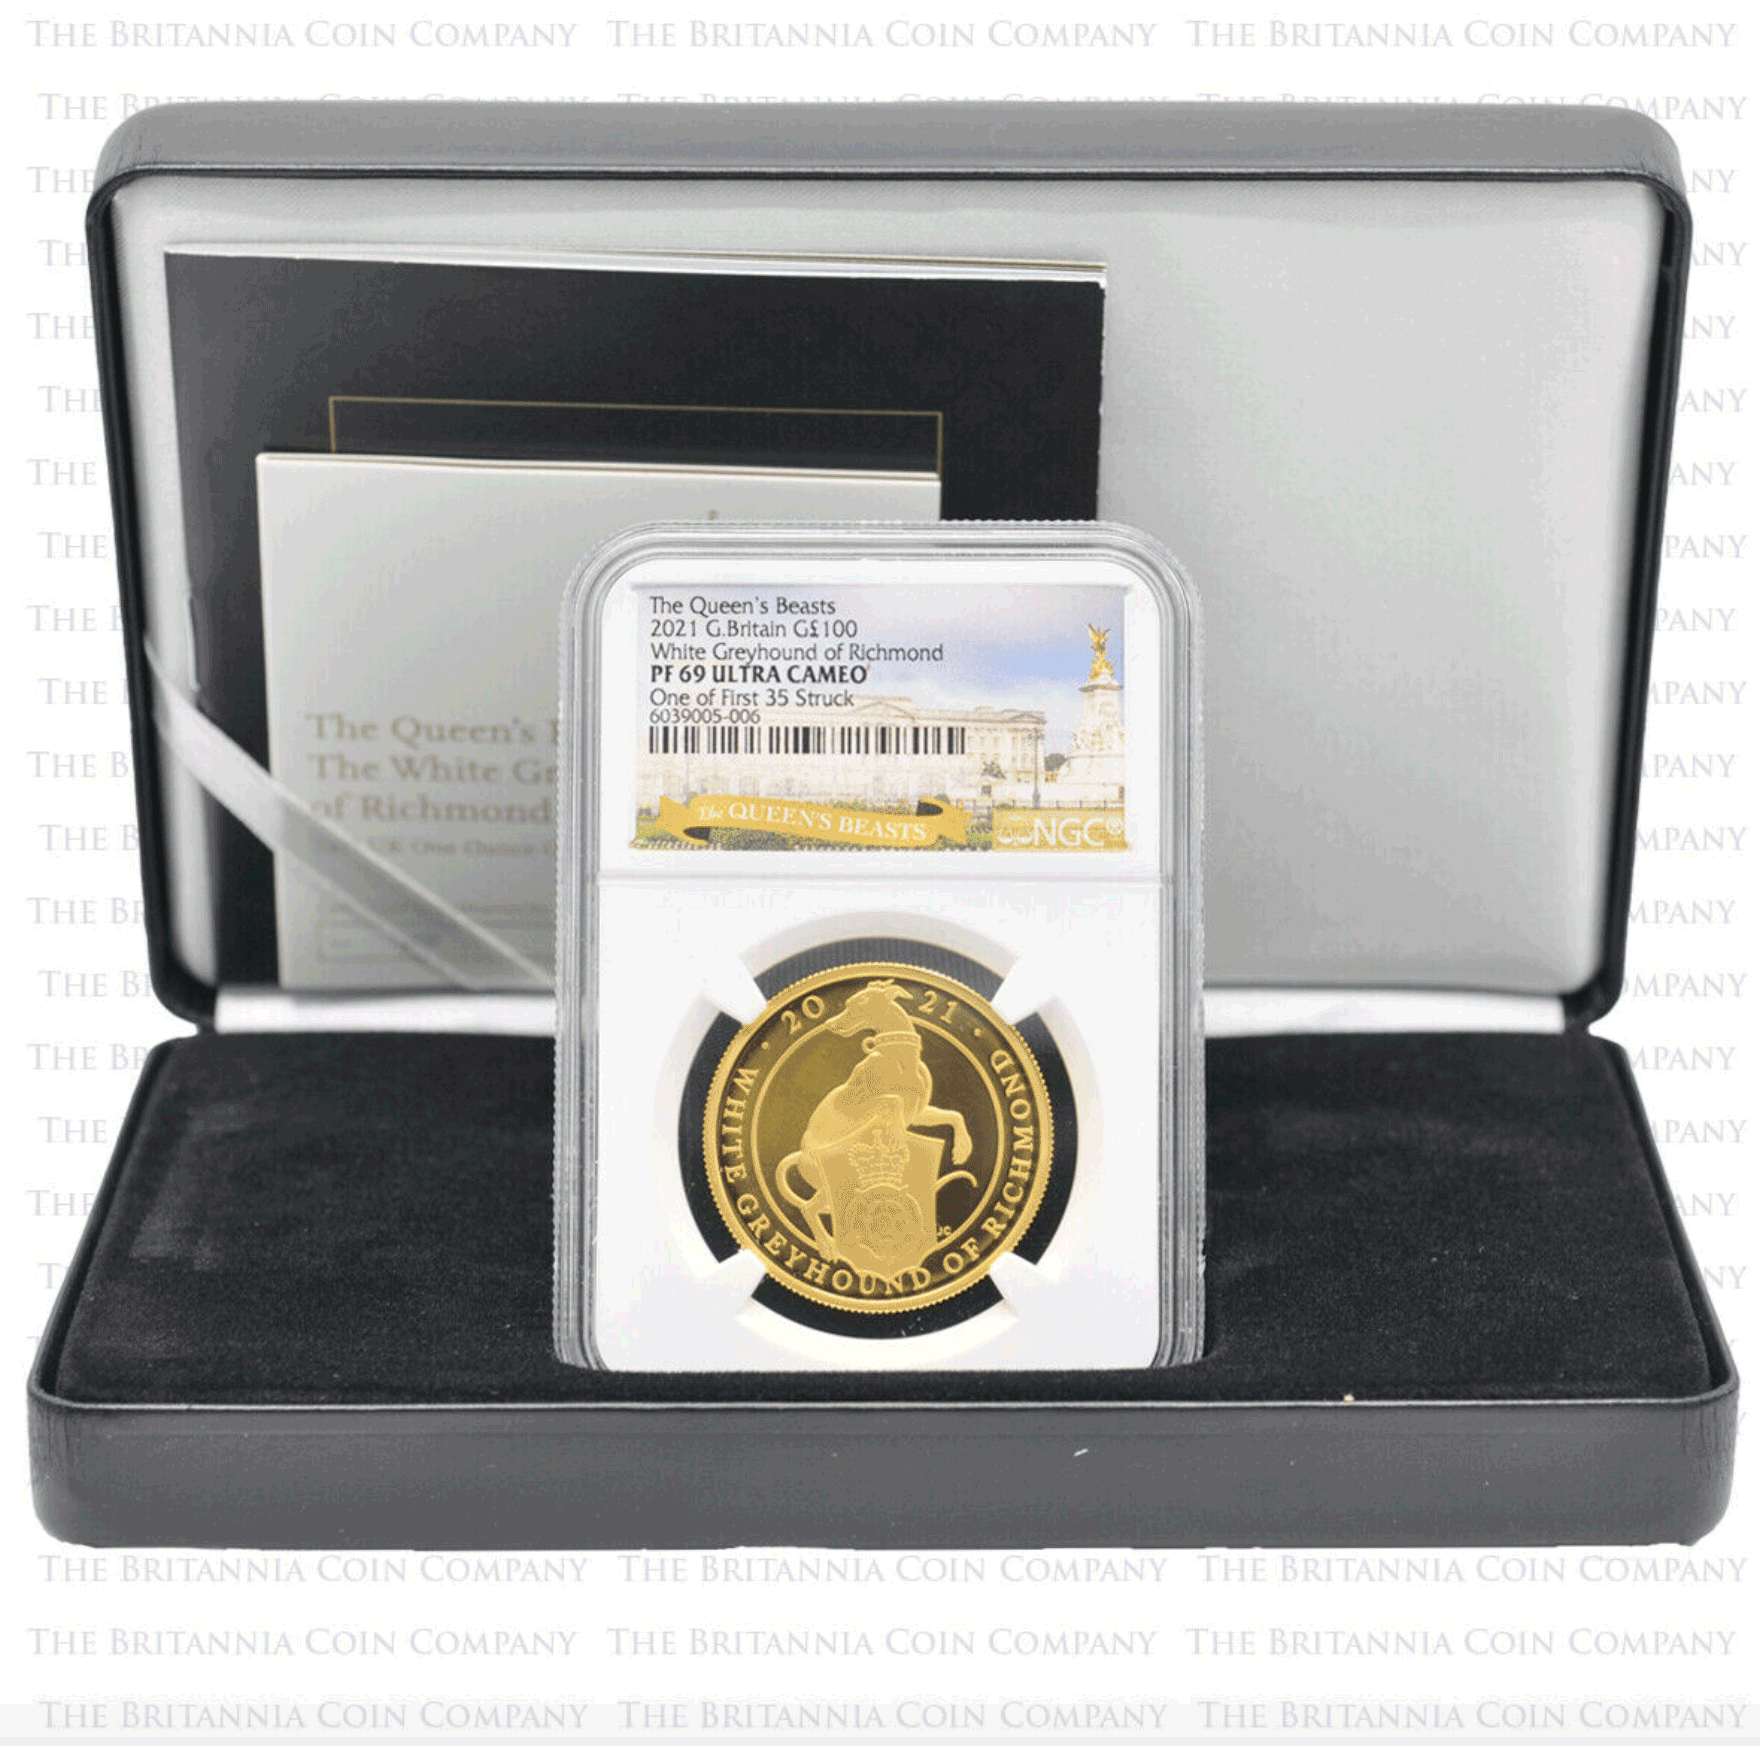 2021-Queens-Beasts-Greyhound-Gold-Proof-1oz-PF69